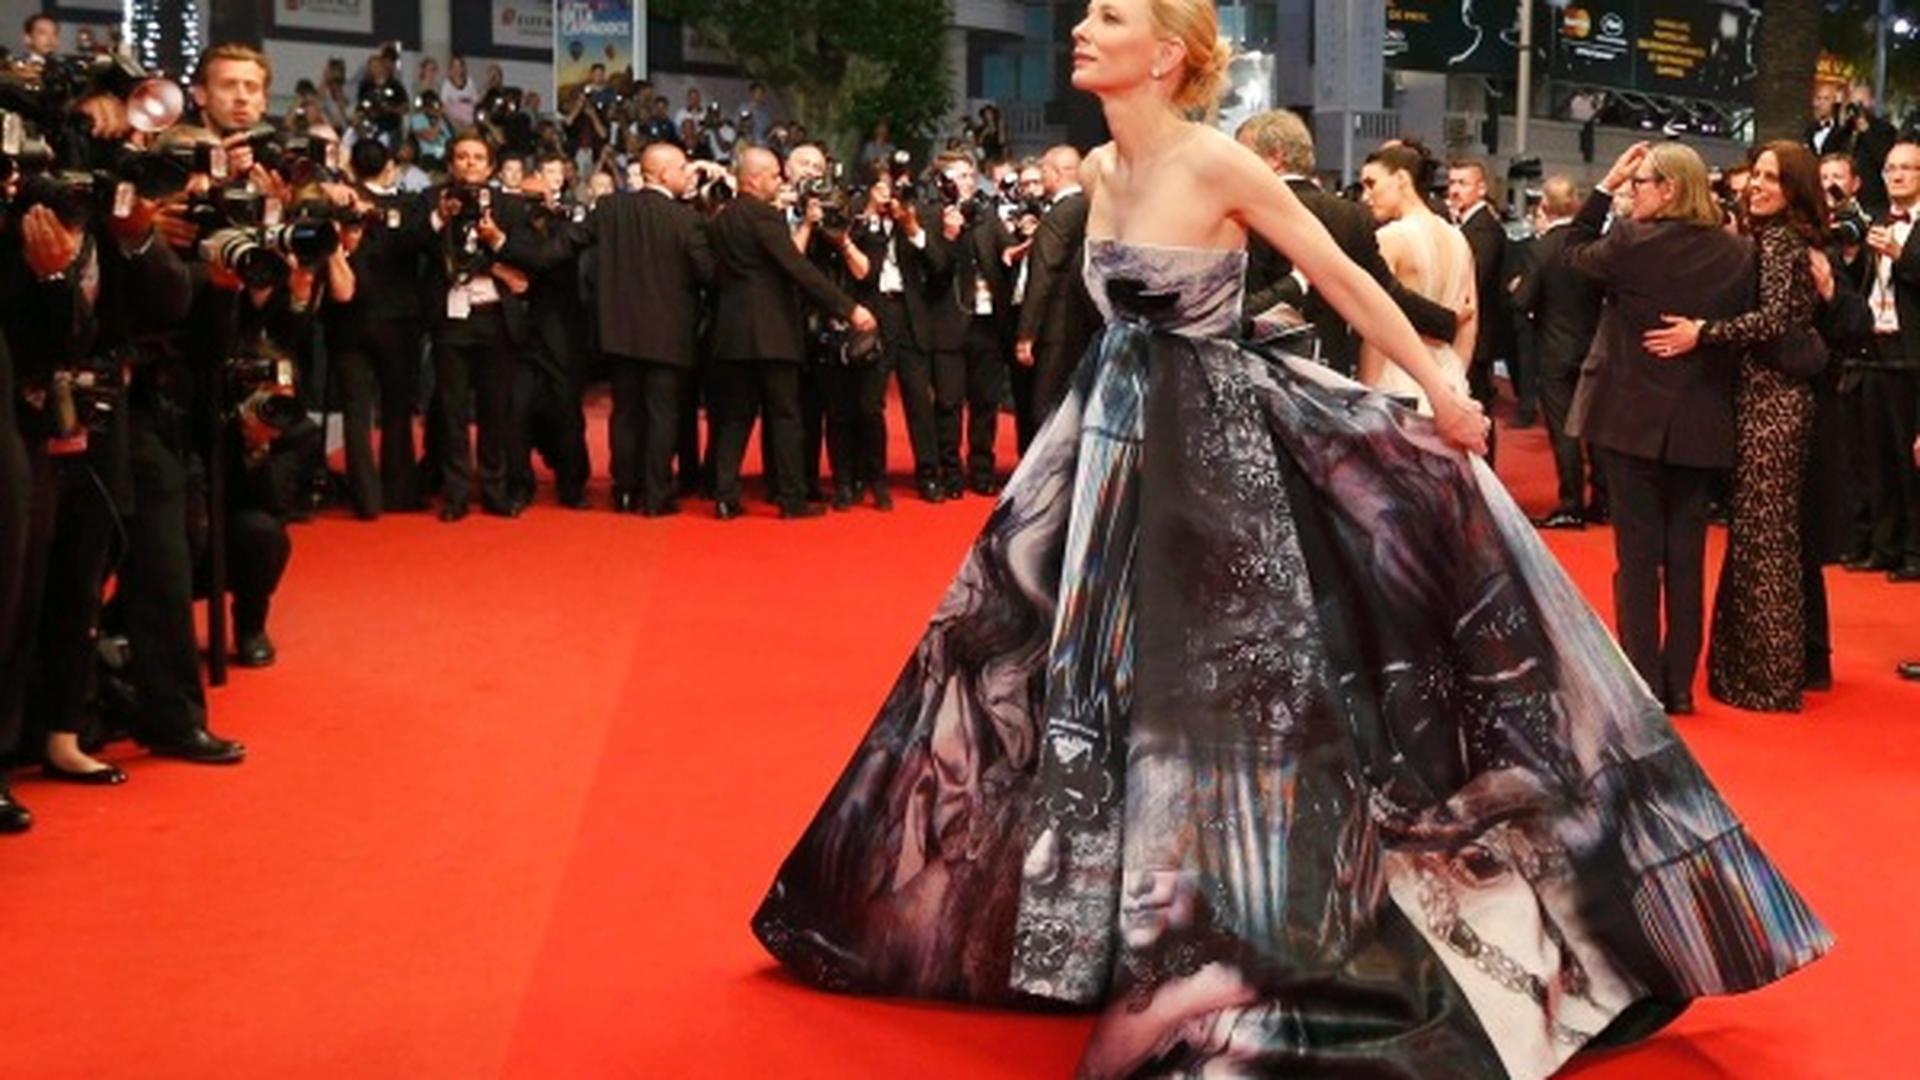 Cast member Cate Blanchett poses on the red carpet as she leaves after the screening of the film "Carol" in competition at the 68th Cannes Film Festival in Cannes, southern France, May 17, 2015.                  REUTERS/Regis Duvignau 